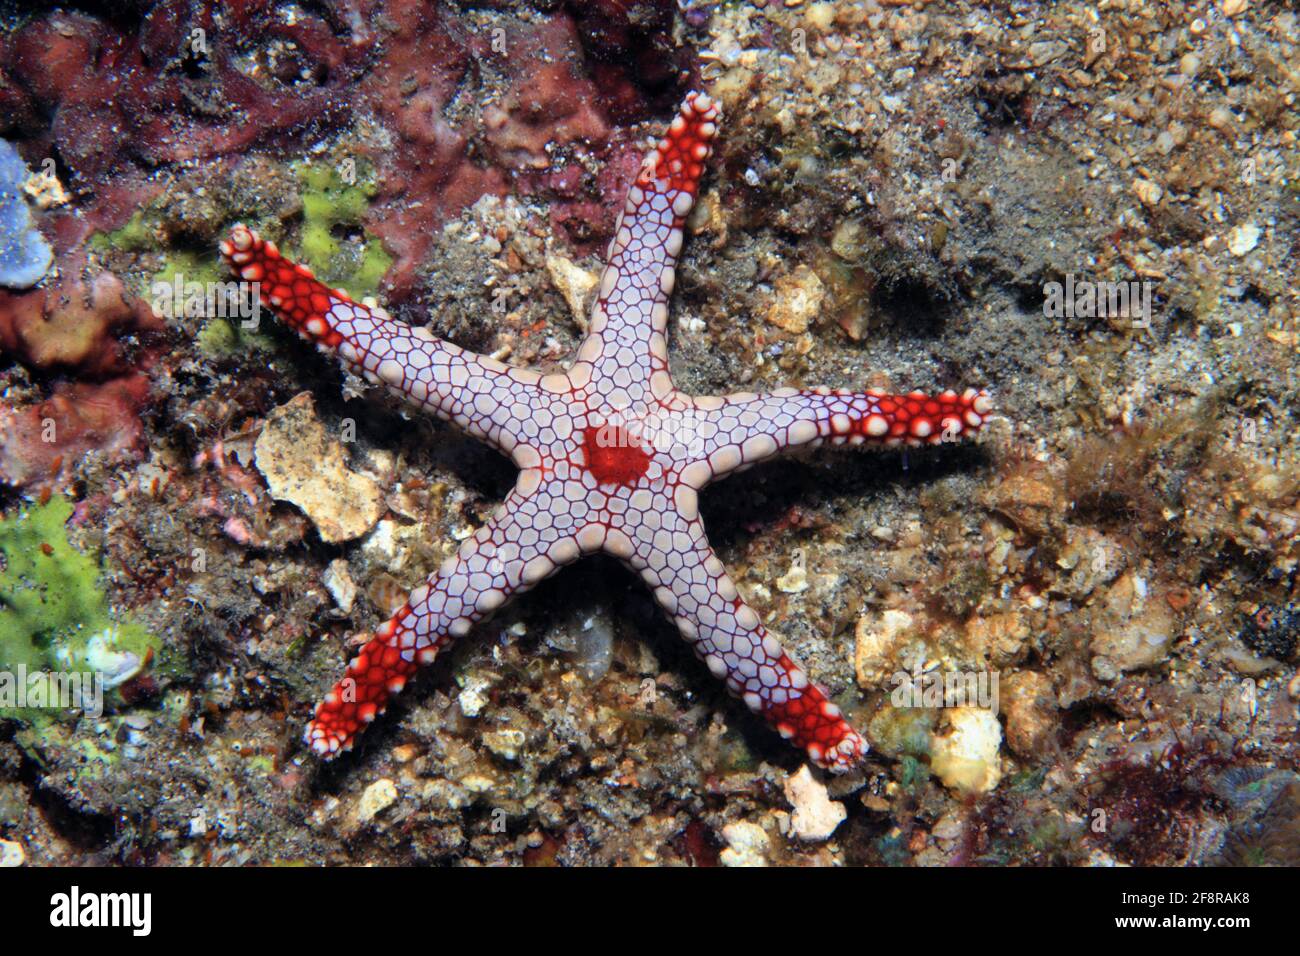 Perl-Seestern, Necklace sea star, Fromia monilis, Lembeh, Sulawesi, Indonesia Stock Photo